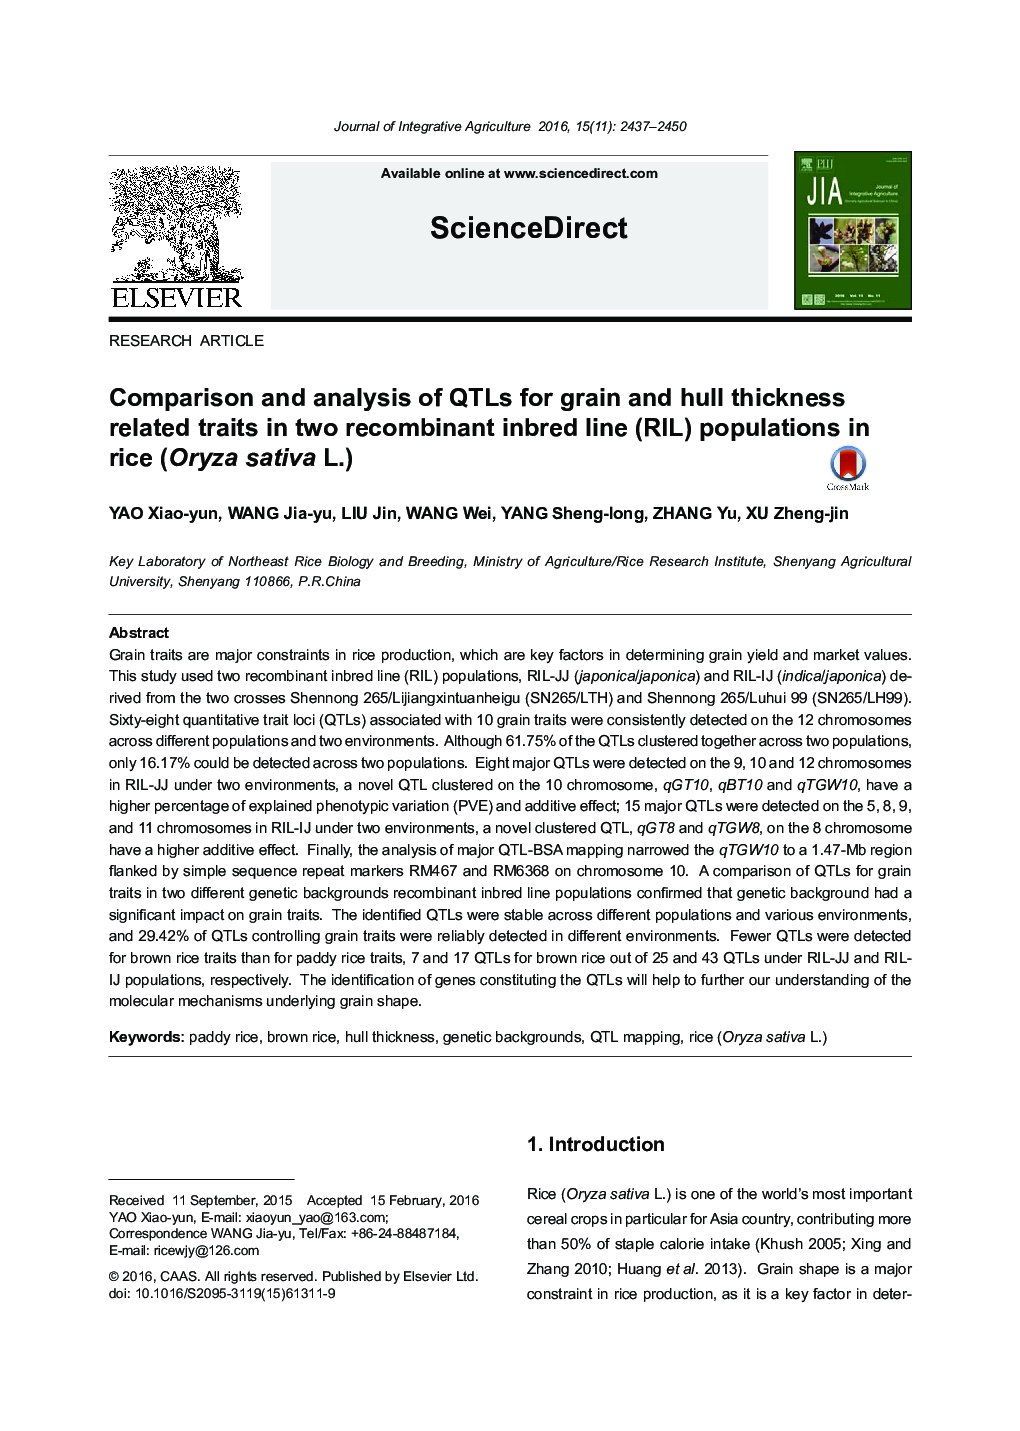 Comparison and analysis of QTLs for grain and hull thickness related traits in two recombinant inbred line (RIL) populations in rice (Oryza sativa L.)